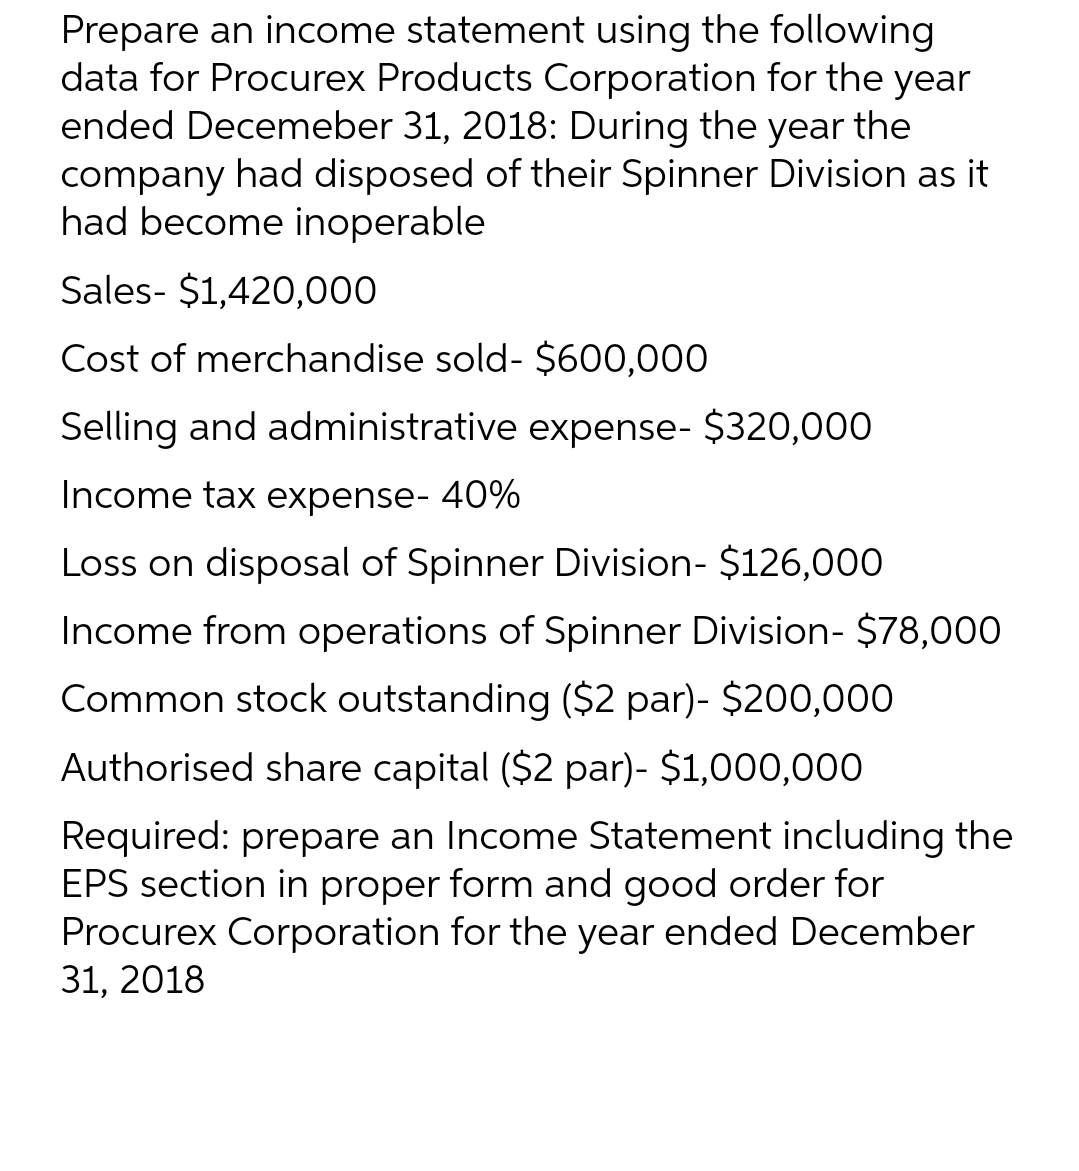 Prepare an income statement using the following
data for Procurex Products Corporation for the year
ended Decemeber 31, 2018: During the year the
company had disposed of their Spinner Division as it
had become inoperable
Sales- $1,420,000
Cost of merchandise sold- $600,000
Selling and administrative expense- $320,000
Income tax expense- 40%
Loss on disposal of Spinner Division- $126,000
Income from operations of Spinner Division- $78,000
Common stock outstanding ($2 par)- $200,000
Authorised share capital ($2 par)- $1,000,000
Required: prepare an Income Statement including the
EPS section in proper form and good order for
Procurex Corporation for the year ended December
31, 2018